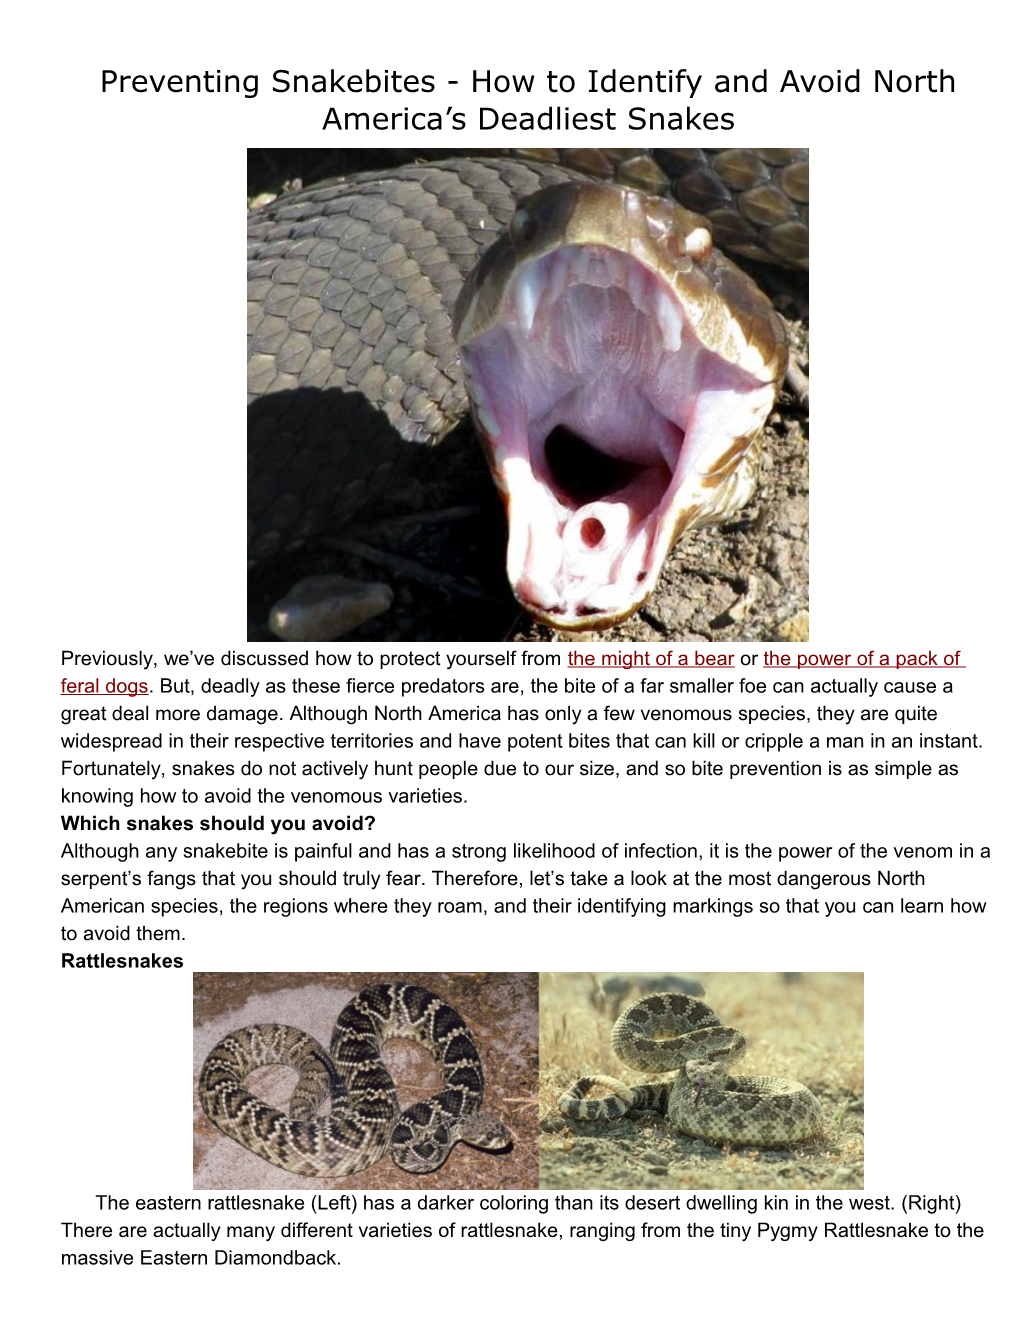 Preventing Snakebites - How to Identify and Avoid North America S Deadliest Snakes